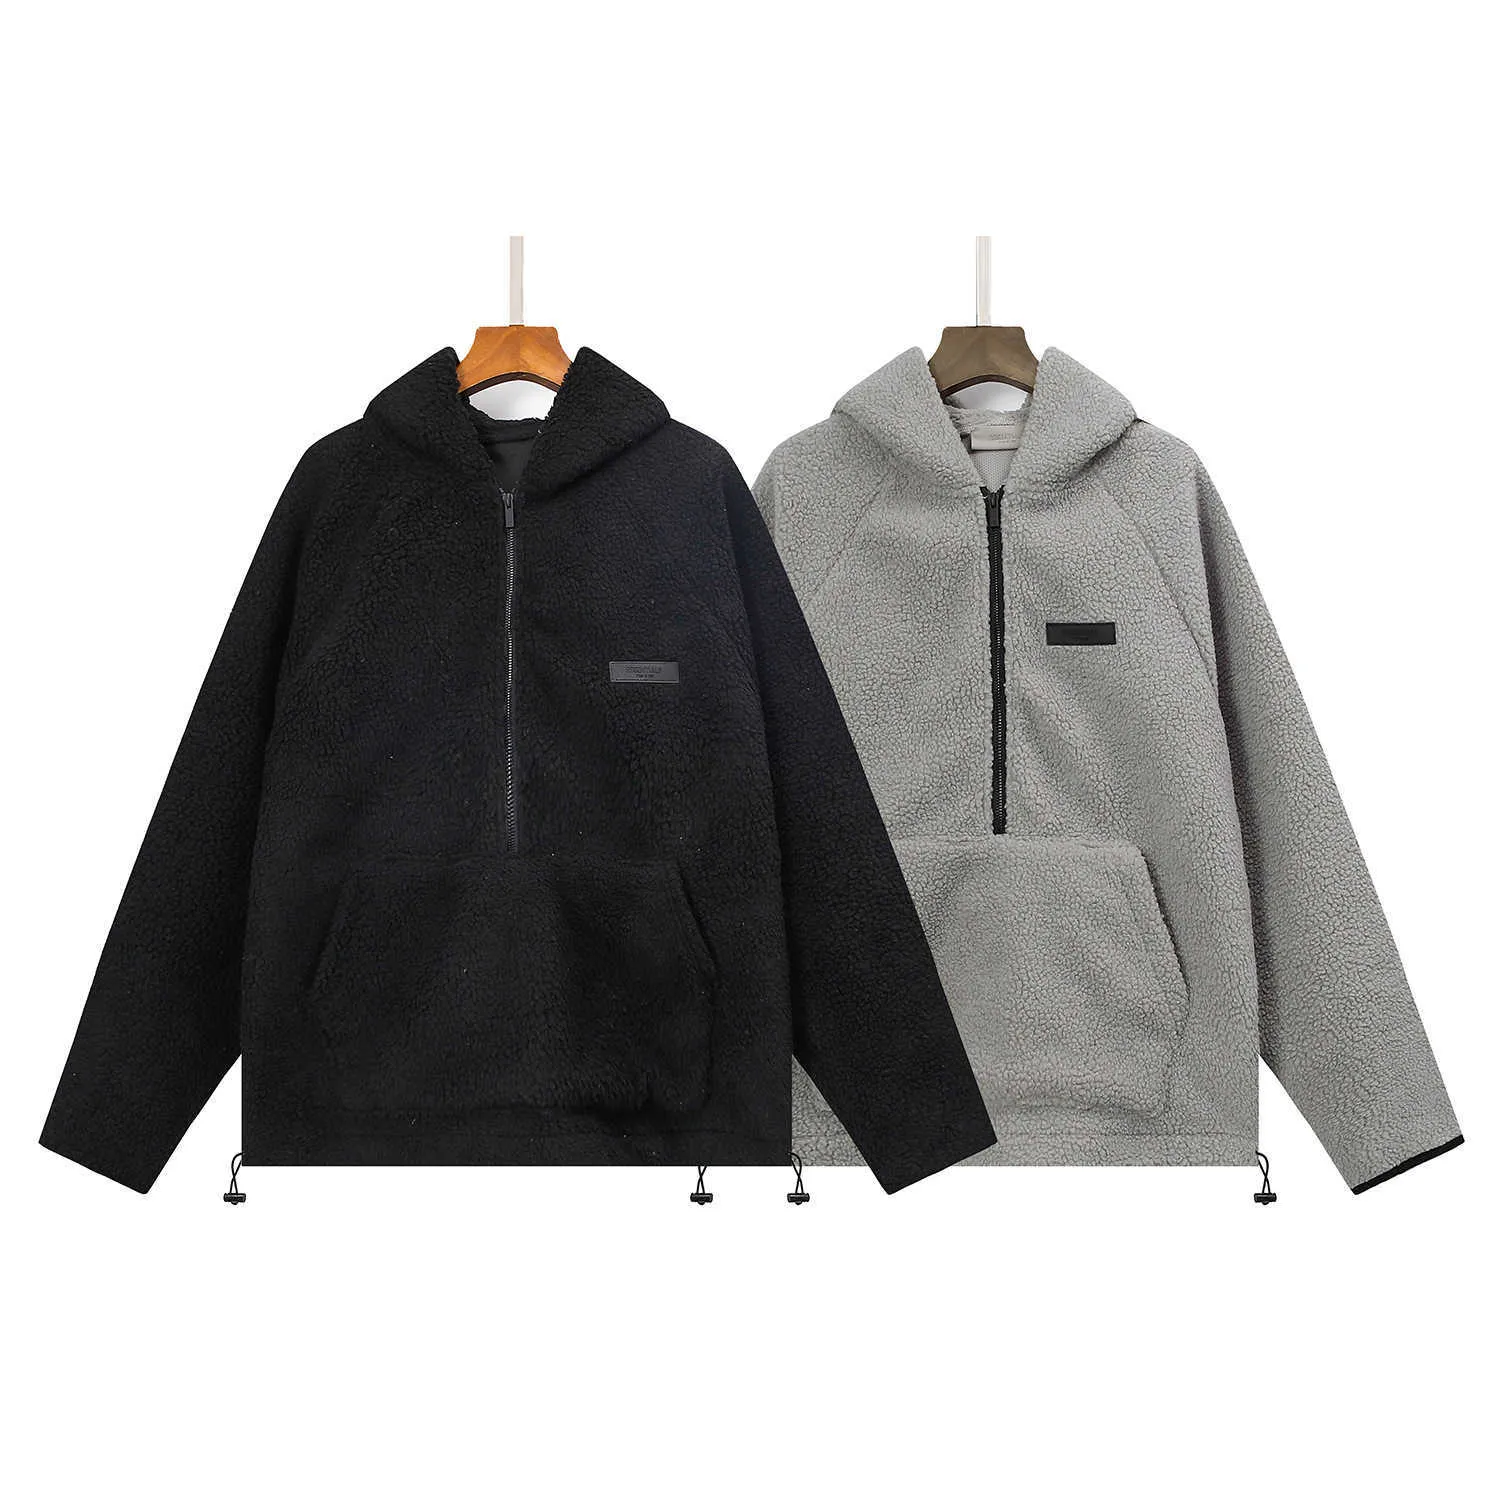 Double Line Lamb Fleece Fleece Coat With Hood With Essential Essentials  Polar American Loose Sweater For Men And Women From Wenjing2, $28.43